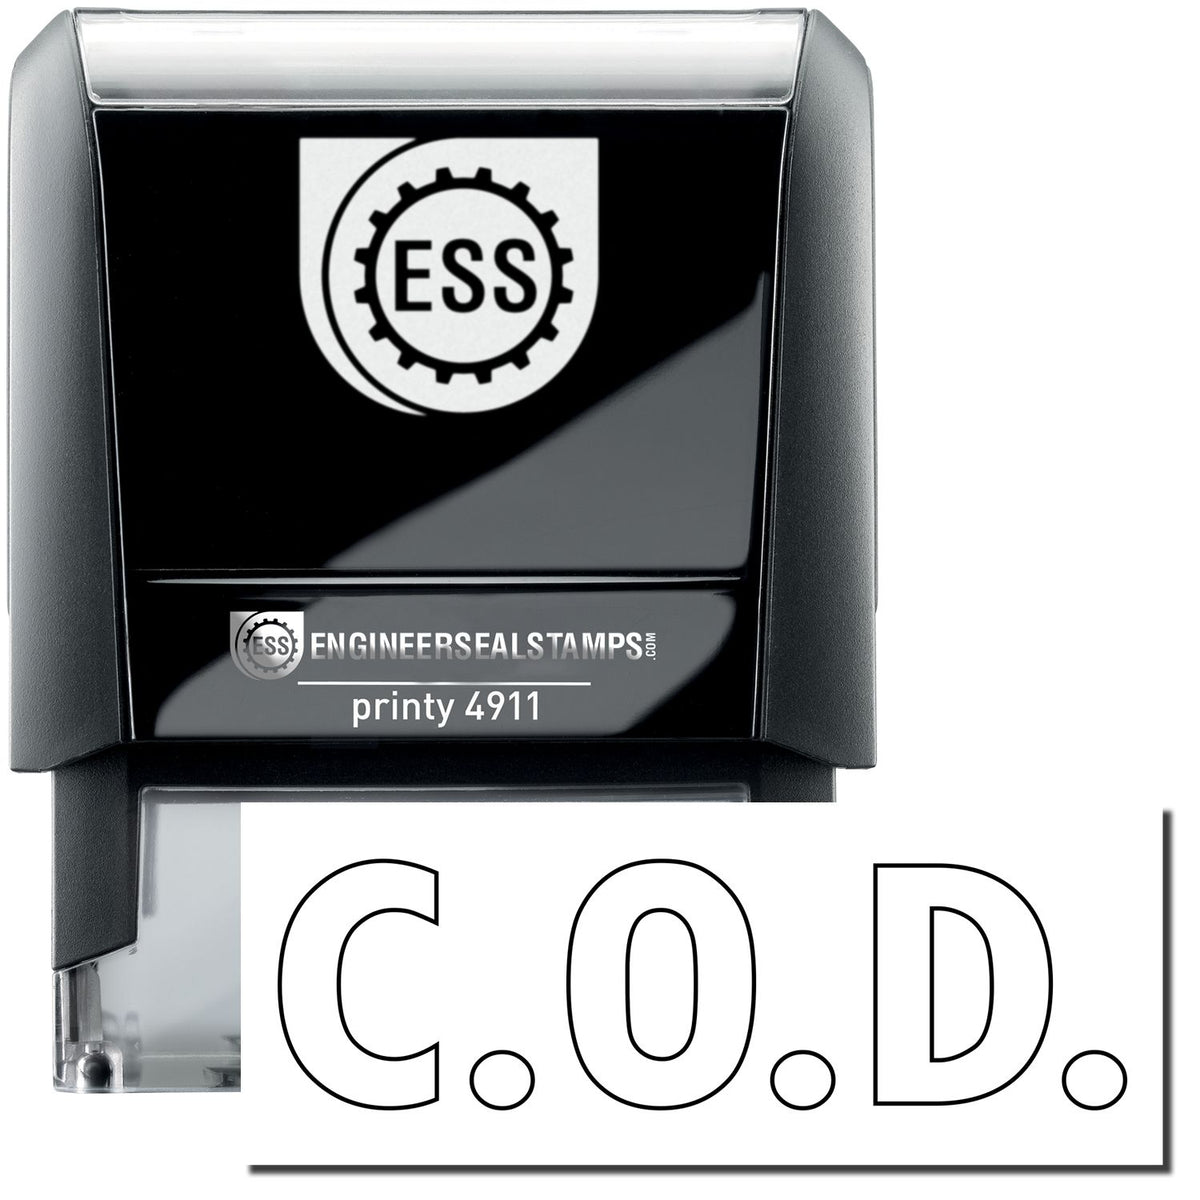 A self-inking stamp with a stamped image showing how the text &quot;C.O.D.&quot; in an outline style is displayed after stamping.